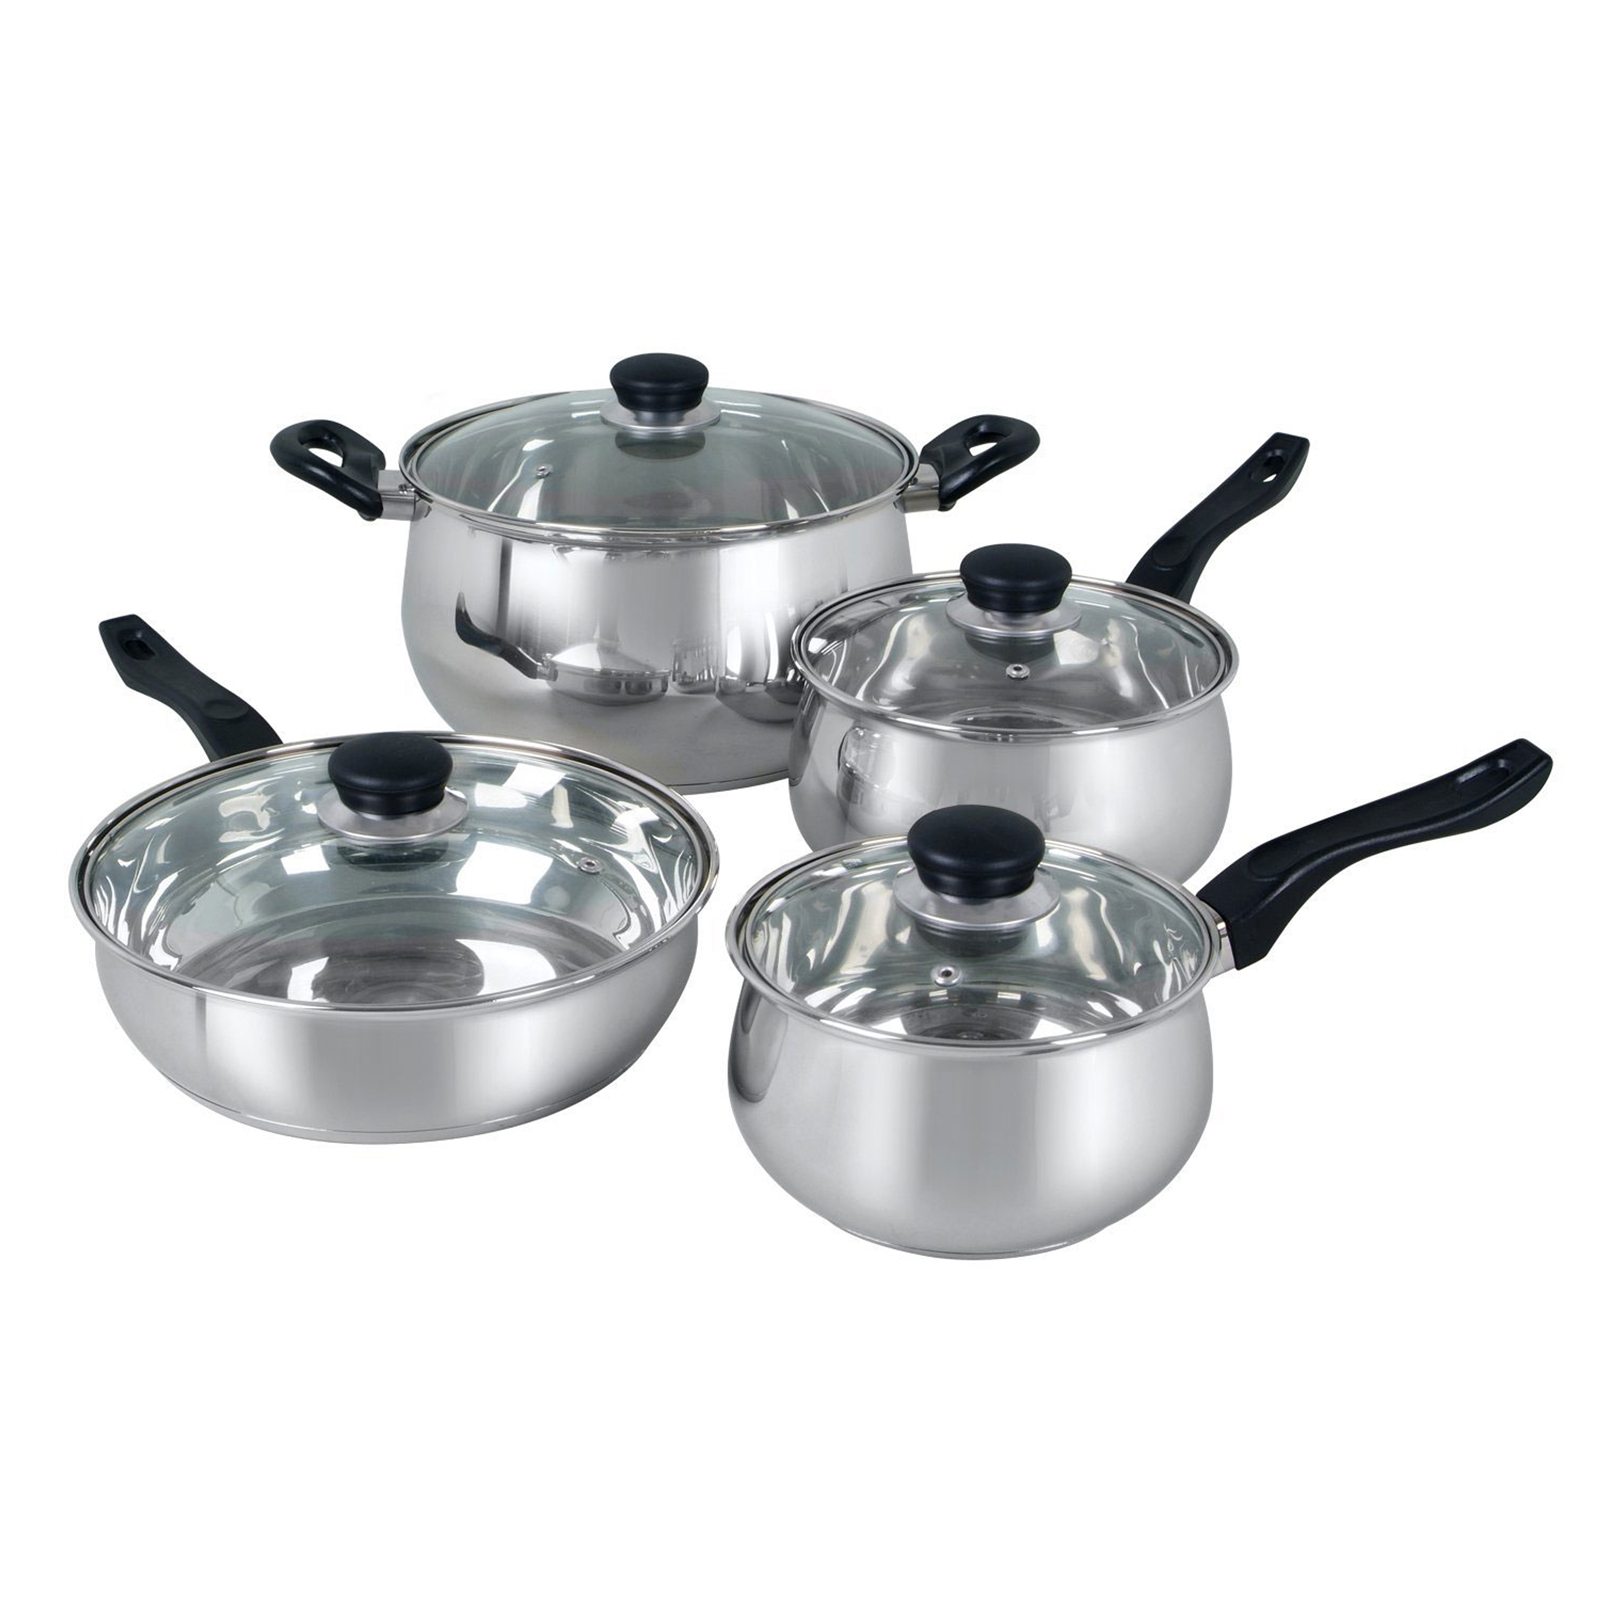 Oster Rametto 8 pc. Stainless Steel Cookware Set